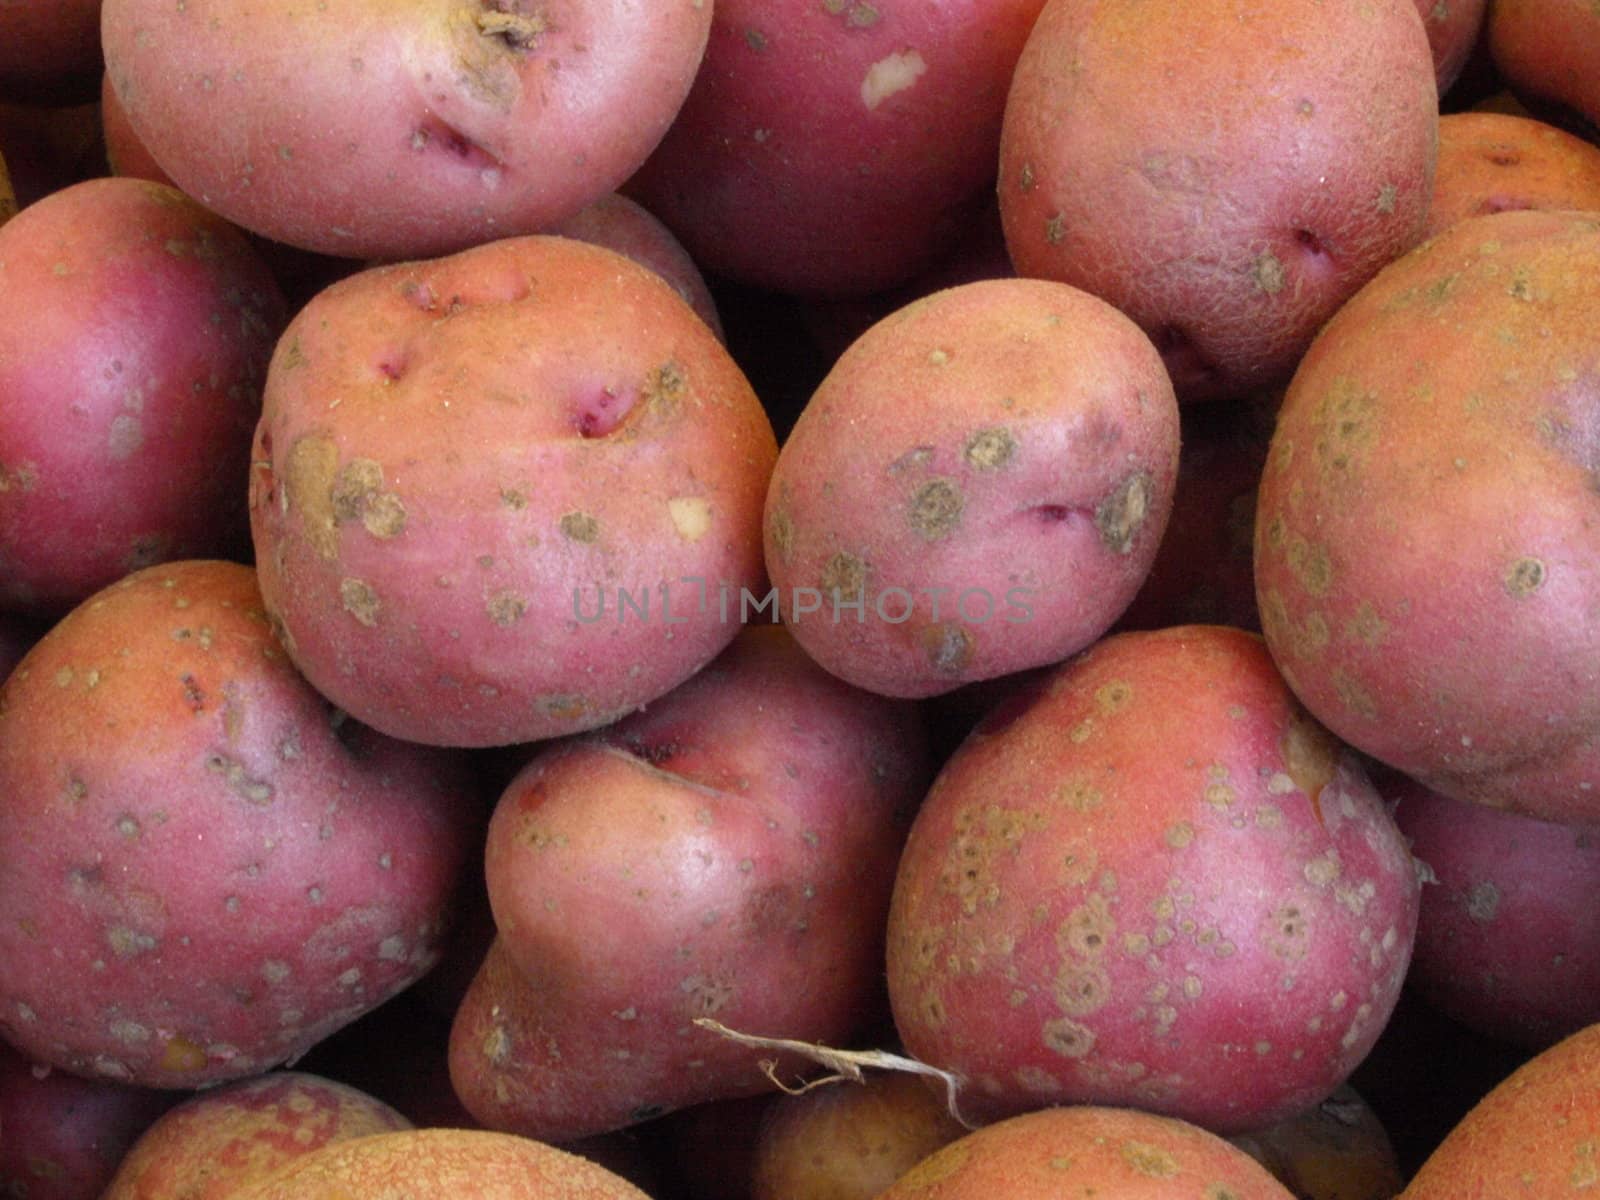 Red potatoes at a local farmers market